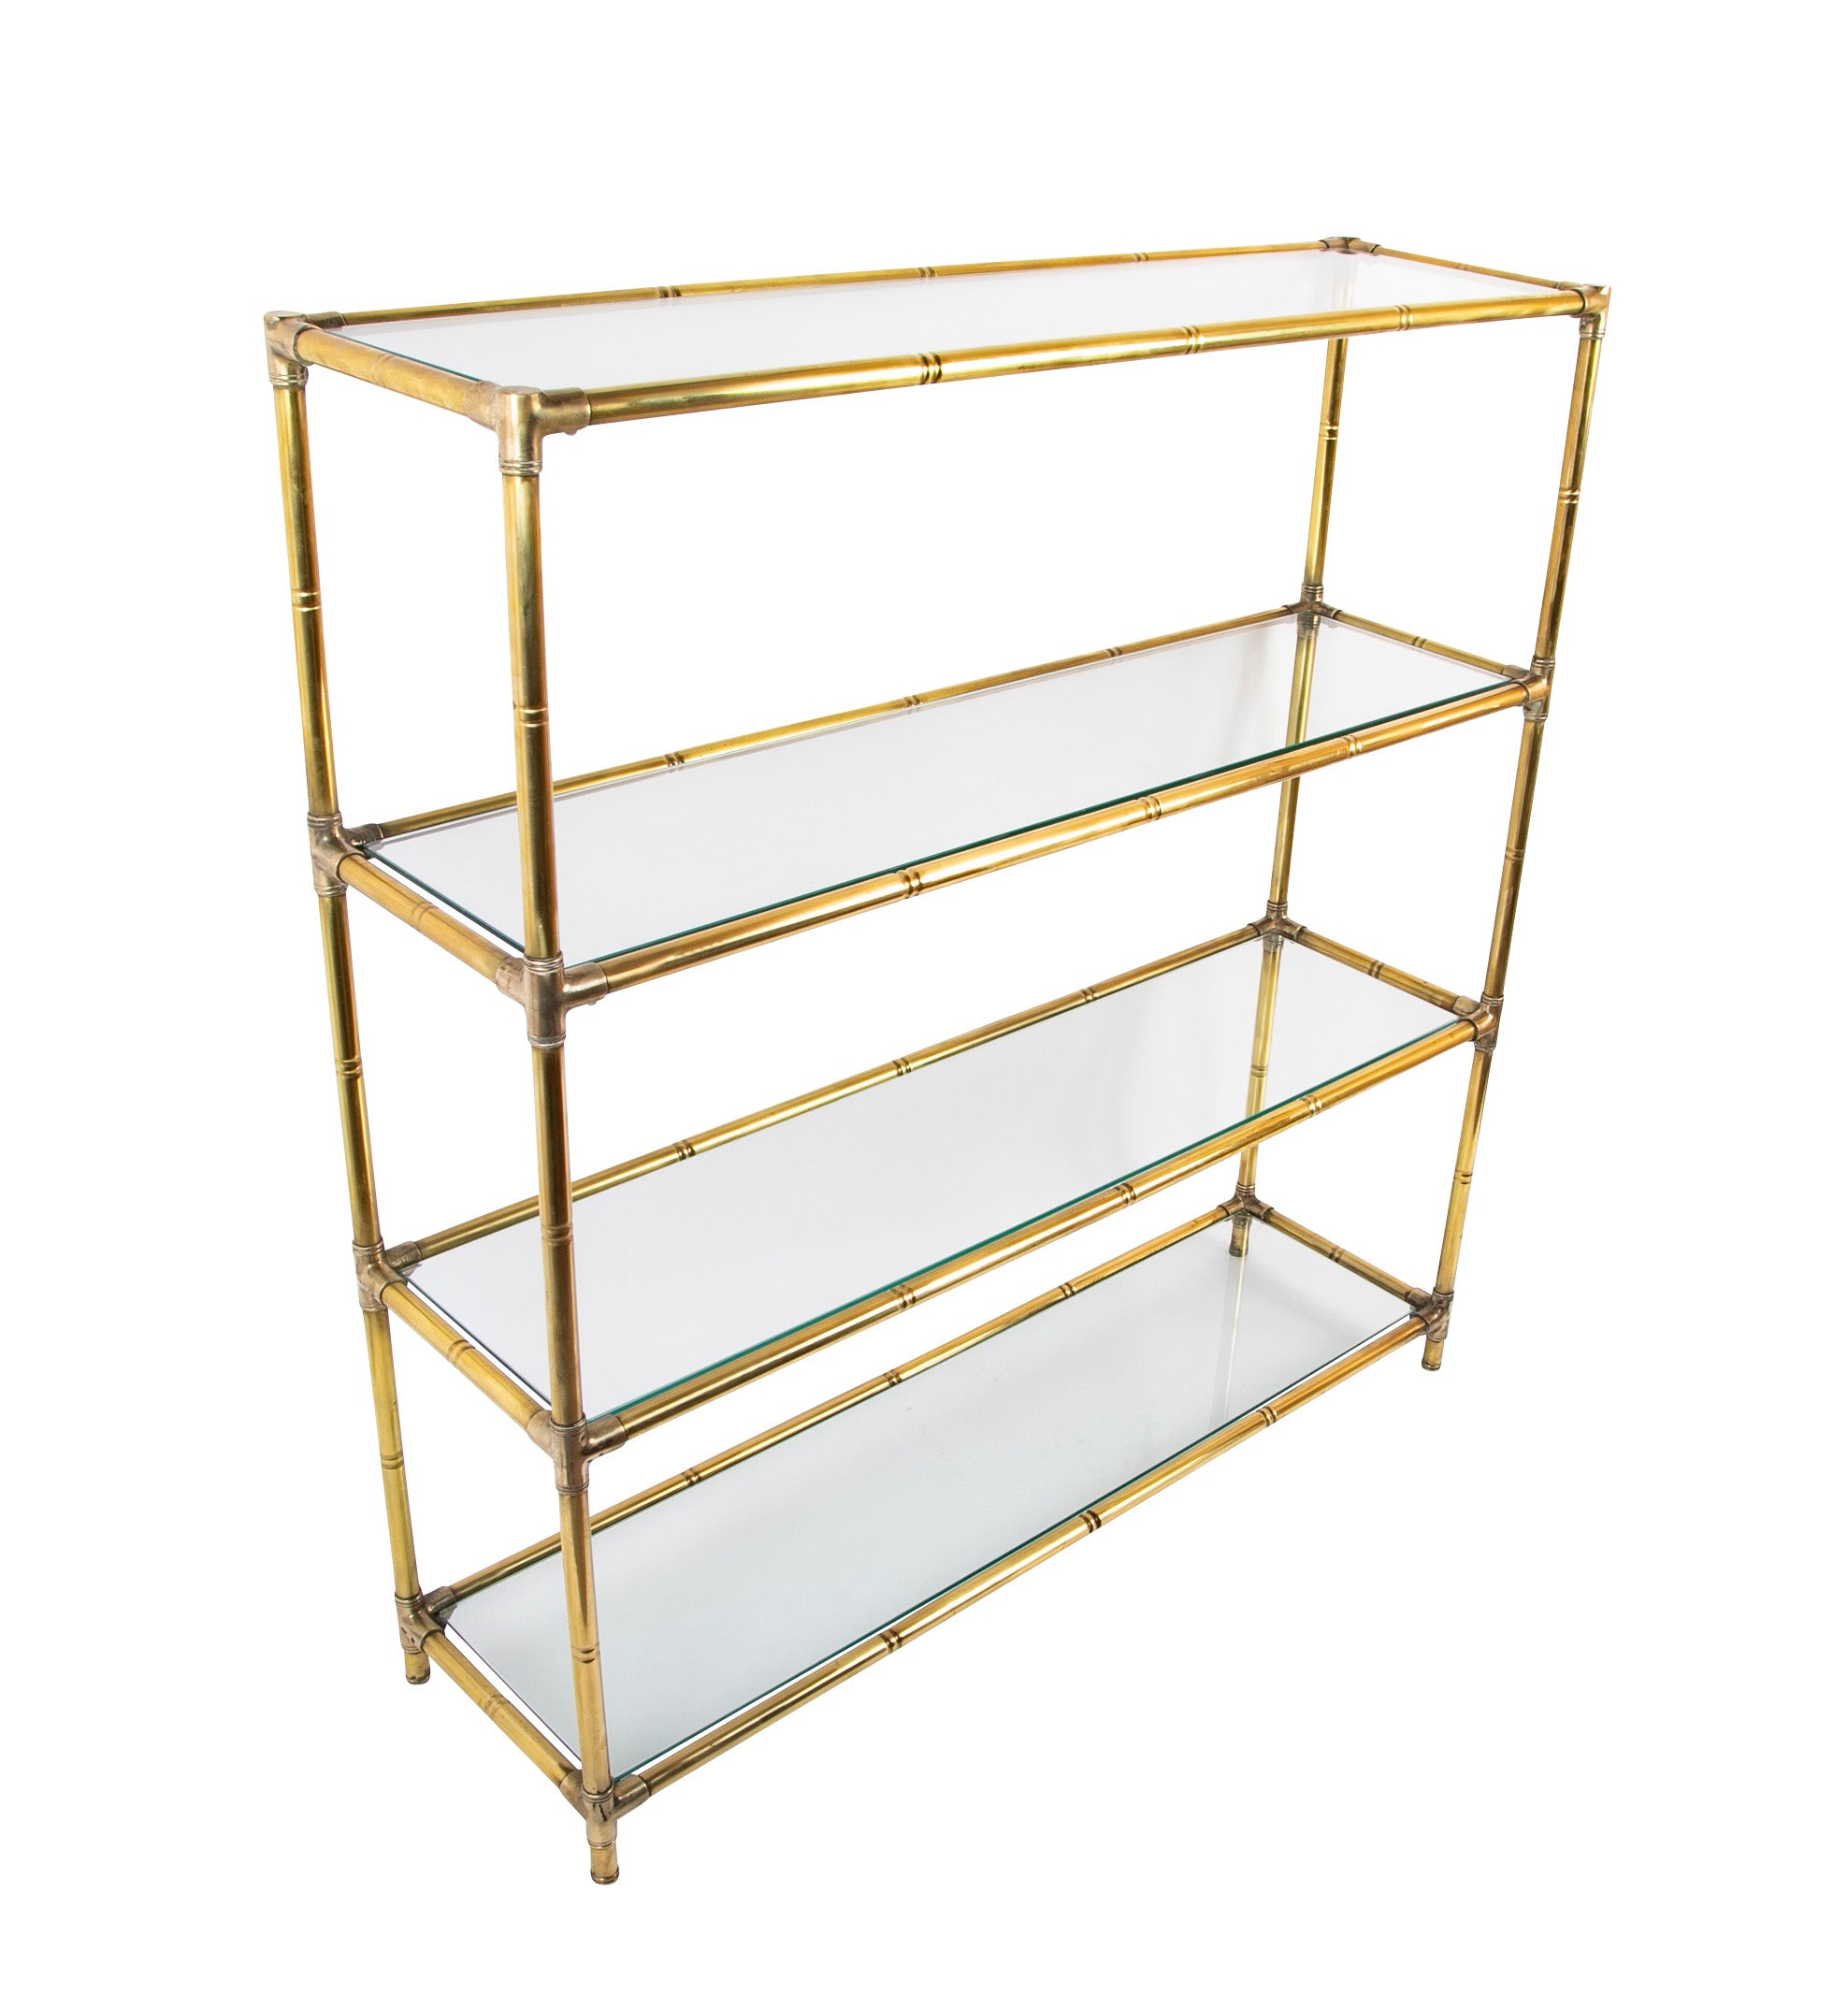 Brass Etagere (that's fancy talk for SHELF) by Design Institute of